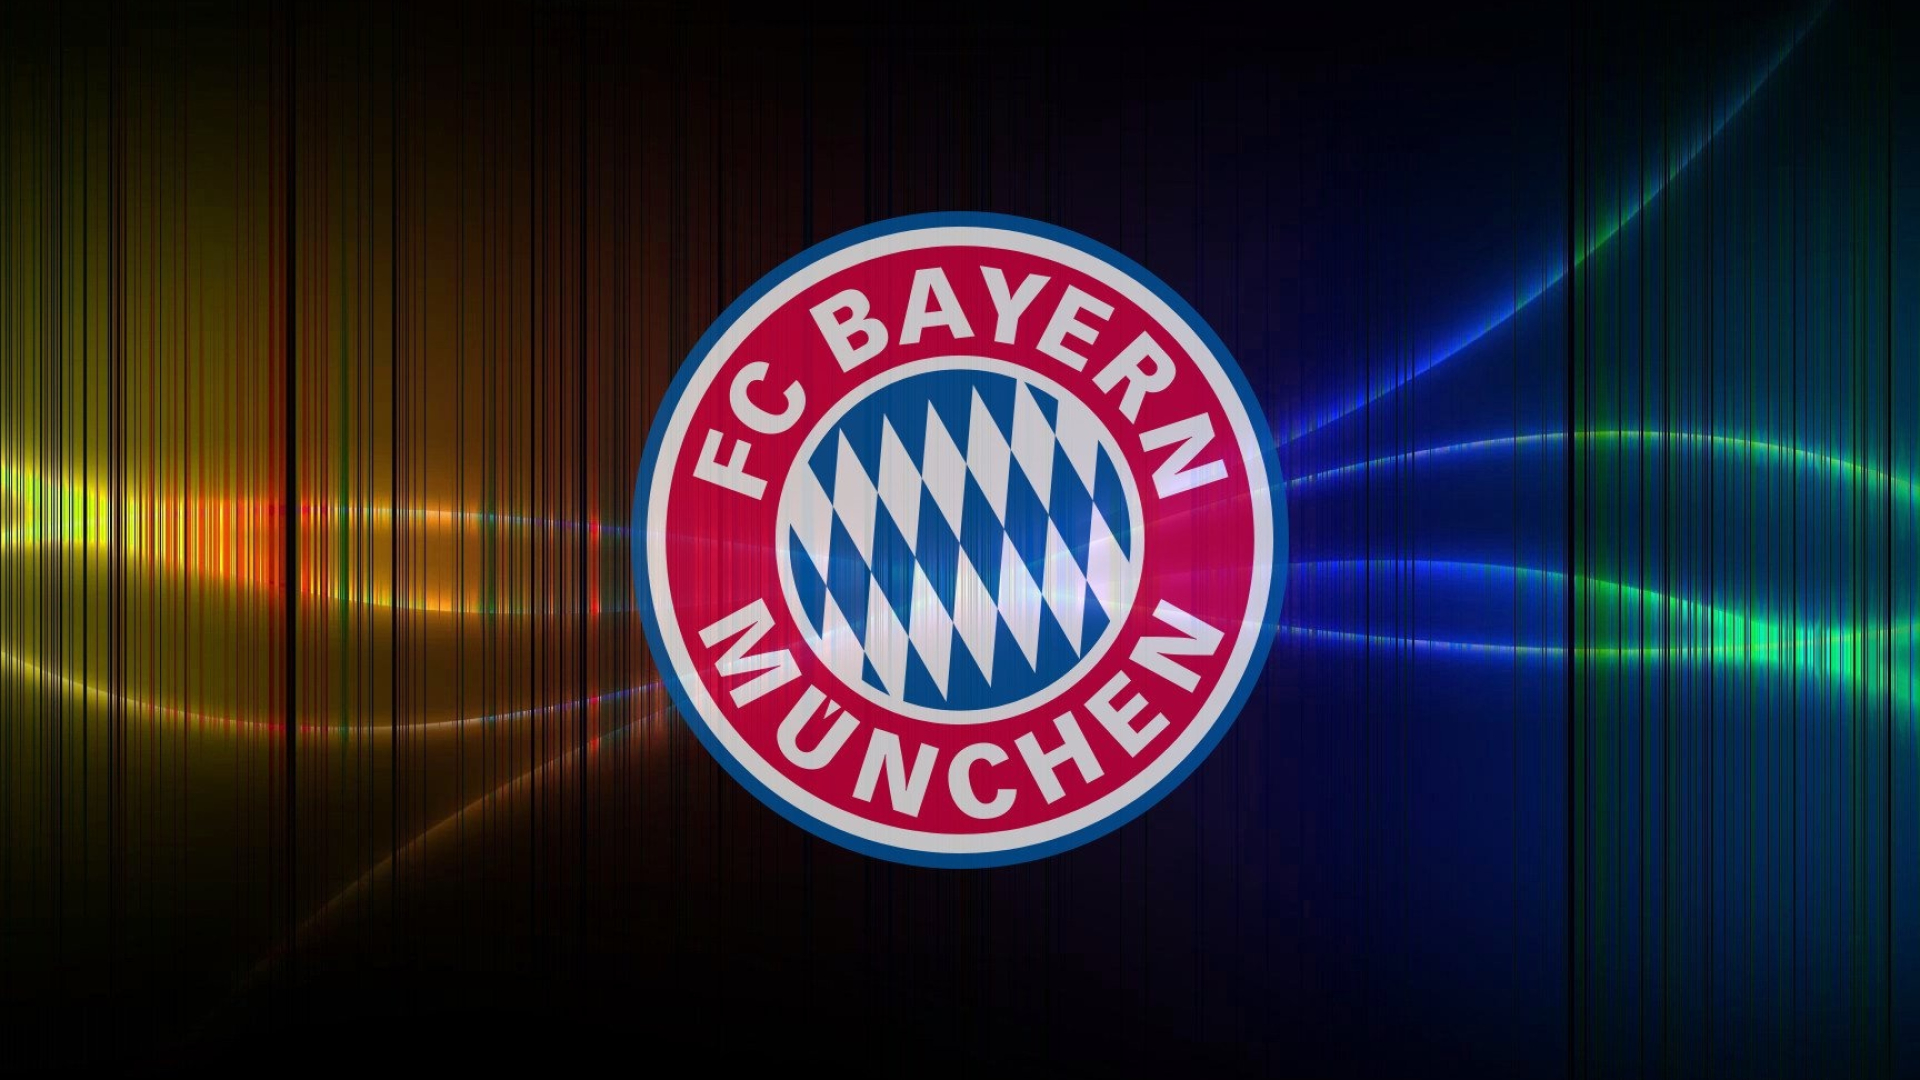 Bayern Munchen FC: The first German team to do the treble, The Bundesliga, UEFA Champions League and DFB Cup. 1920x1080 Full HD Background.